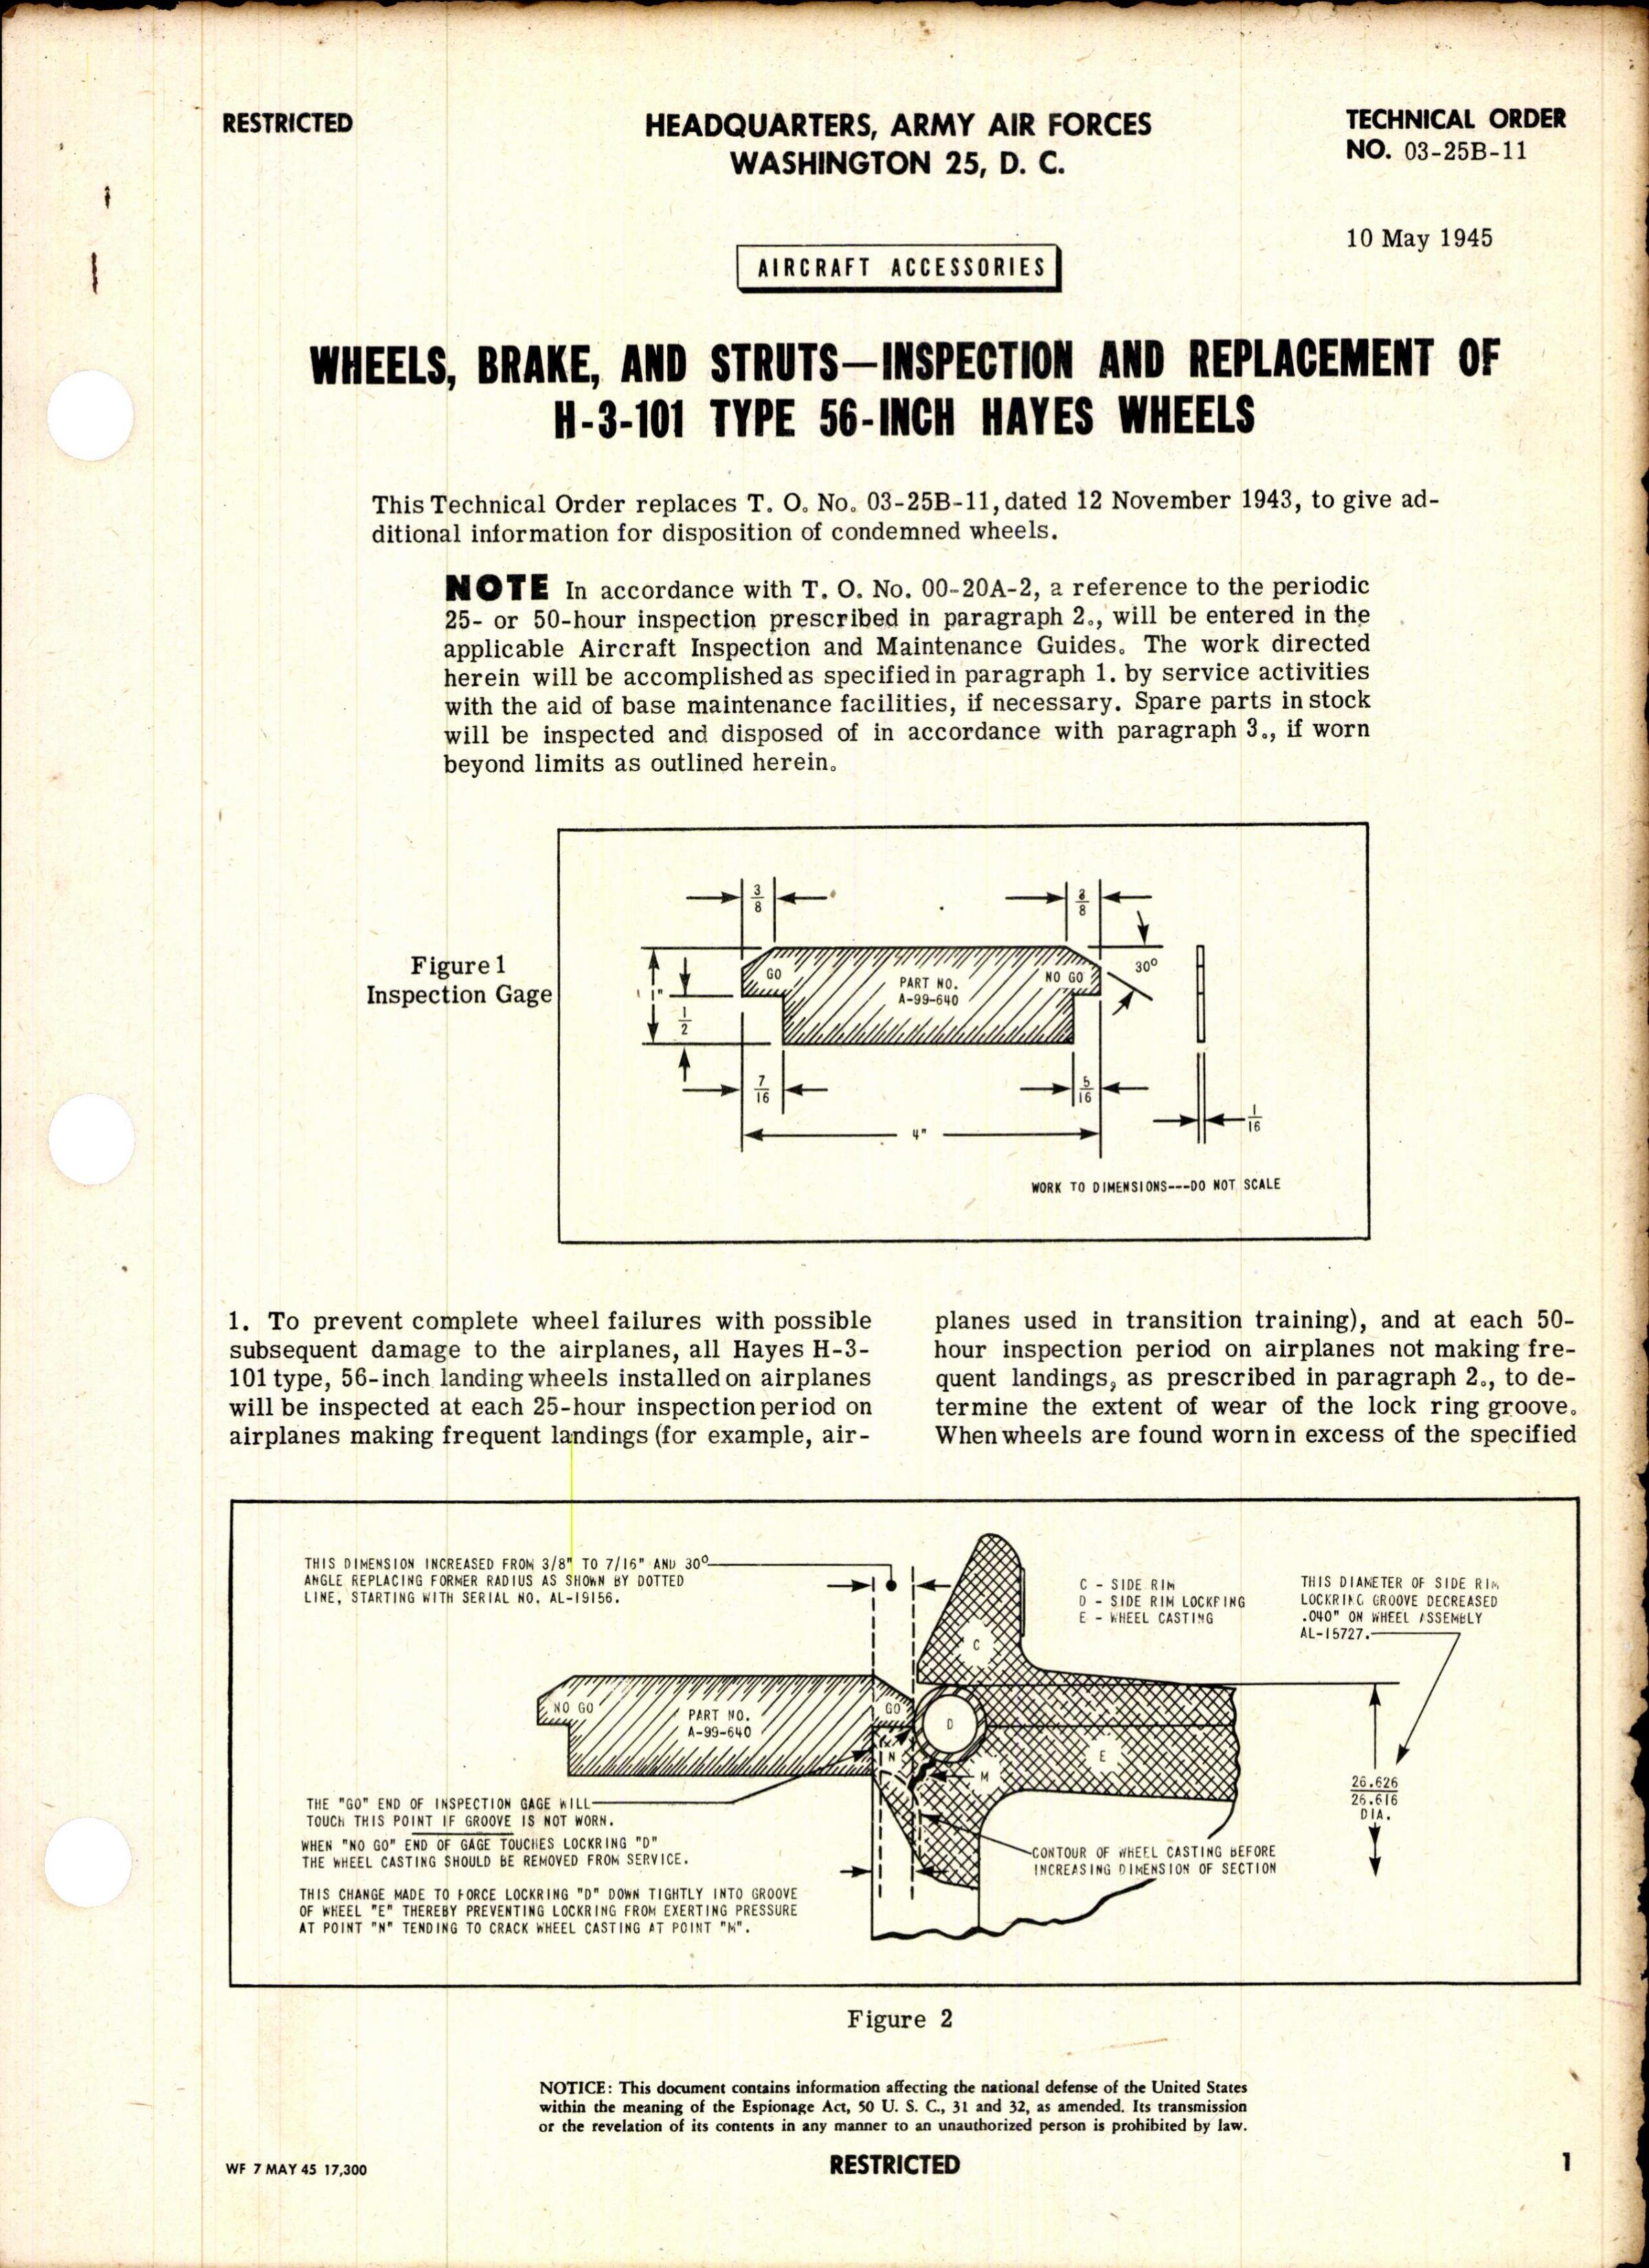 Sample page 1 from AirCorps Library document: Inspection and Replacement of H-3-101 Type 56-Inch Hayes Wheels